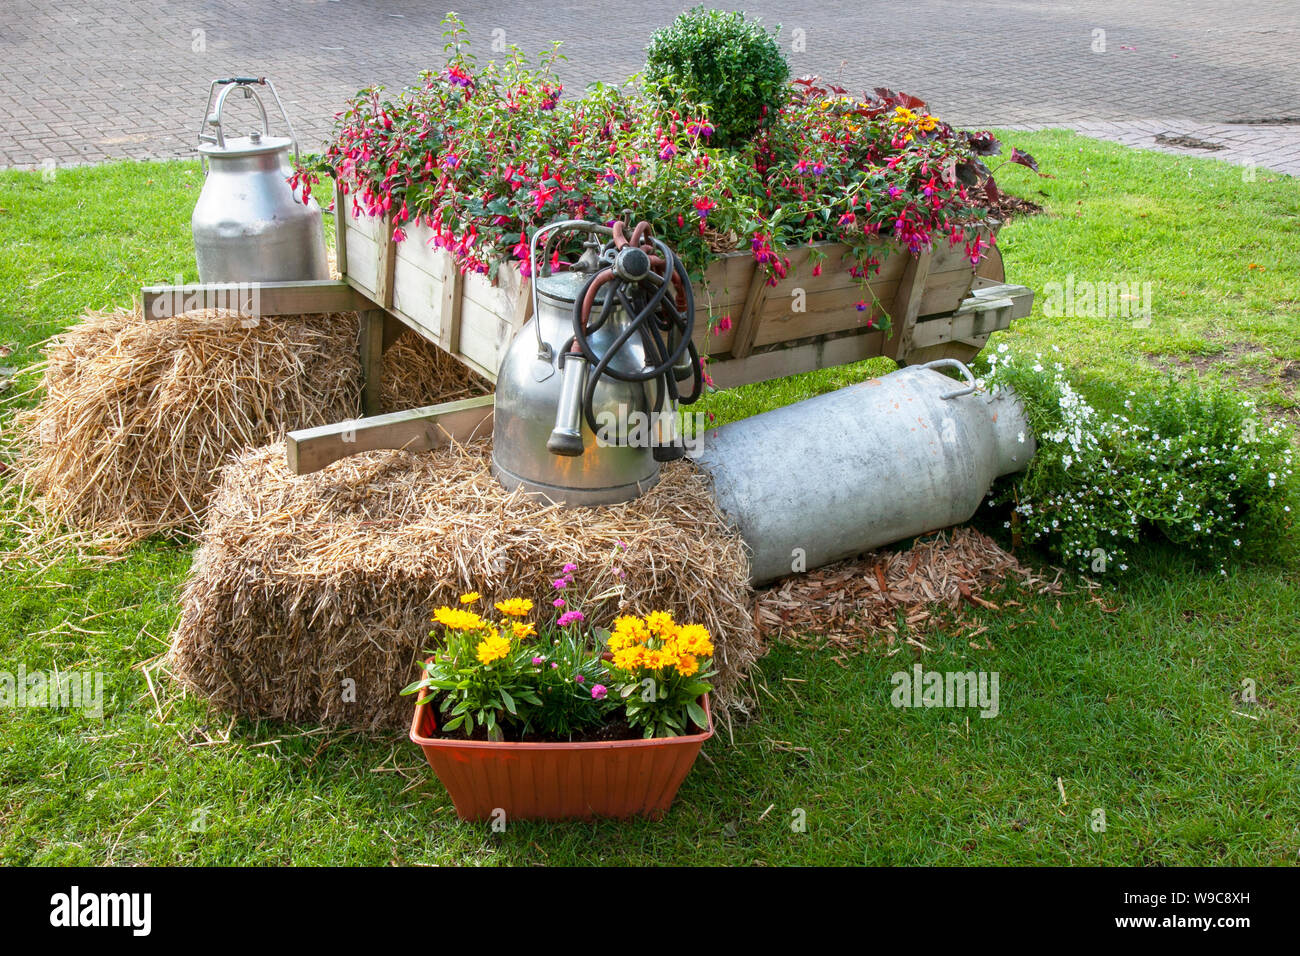 A rustic old wooden wheelbarrow filled with colorful flowers, Dairy milking farm equipment, milk churns, straw bales, at Southport Flower Show, Victoria Park, UK Stock Photo